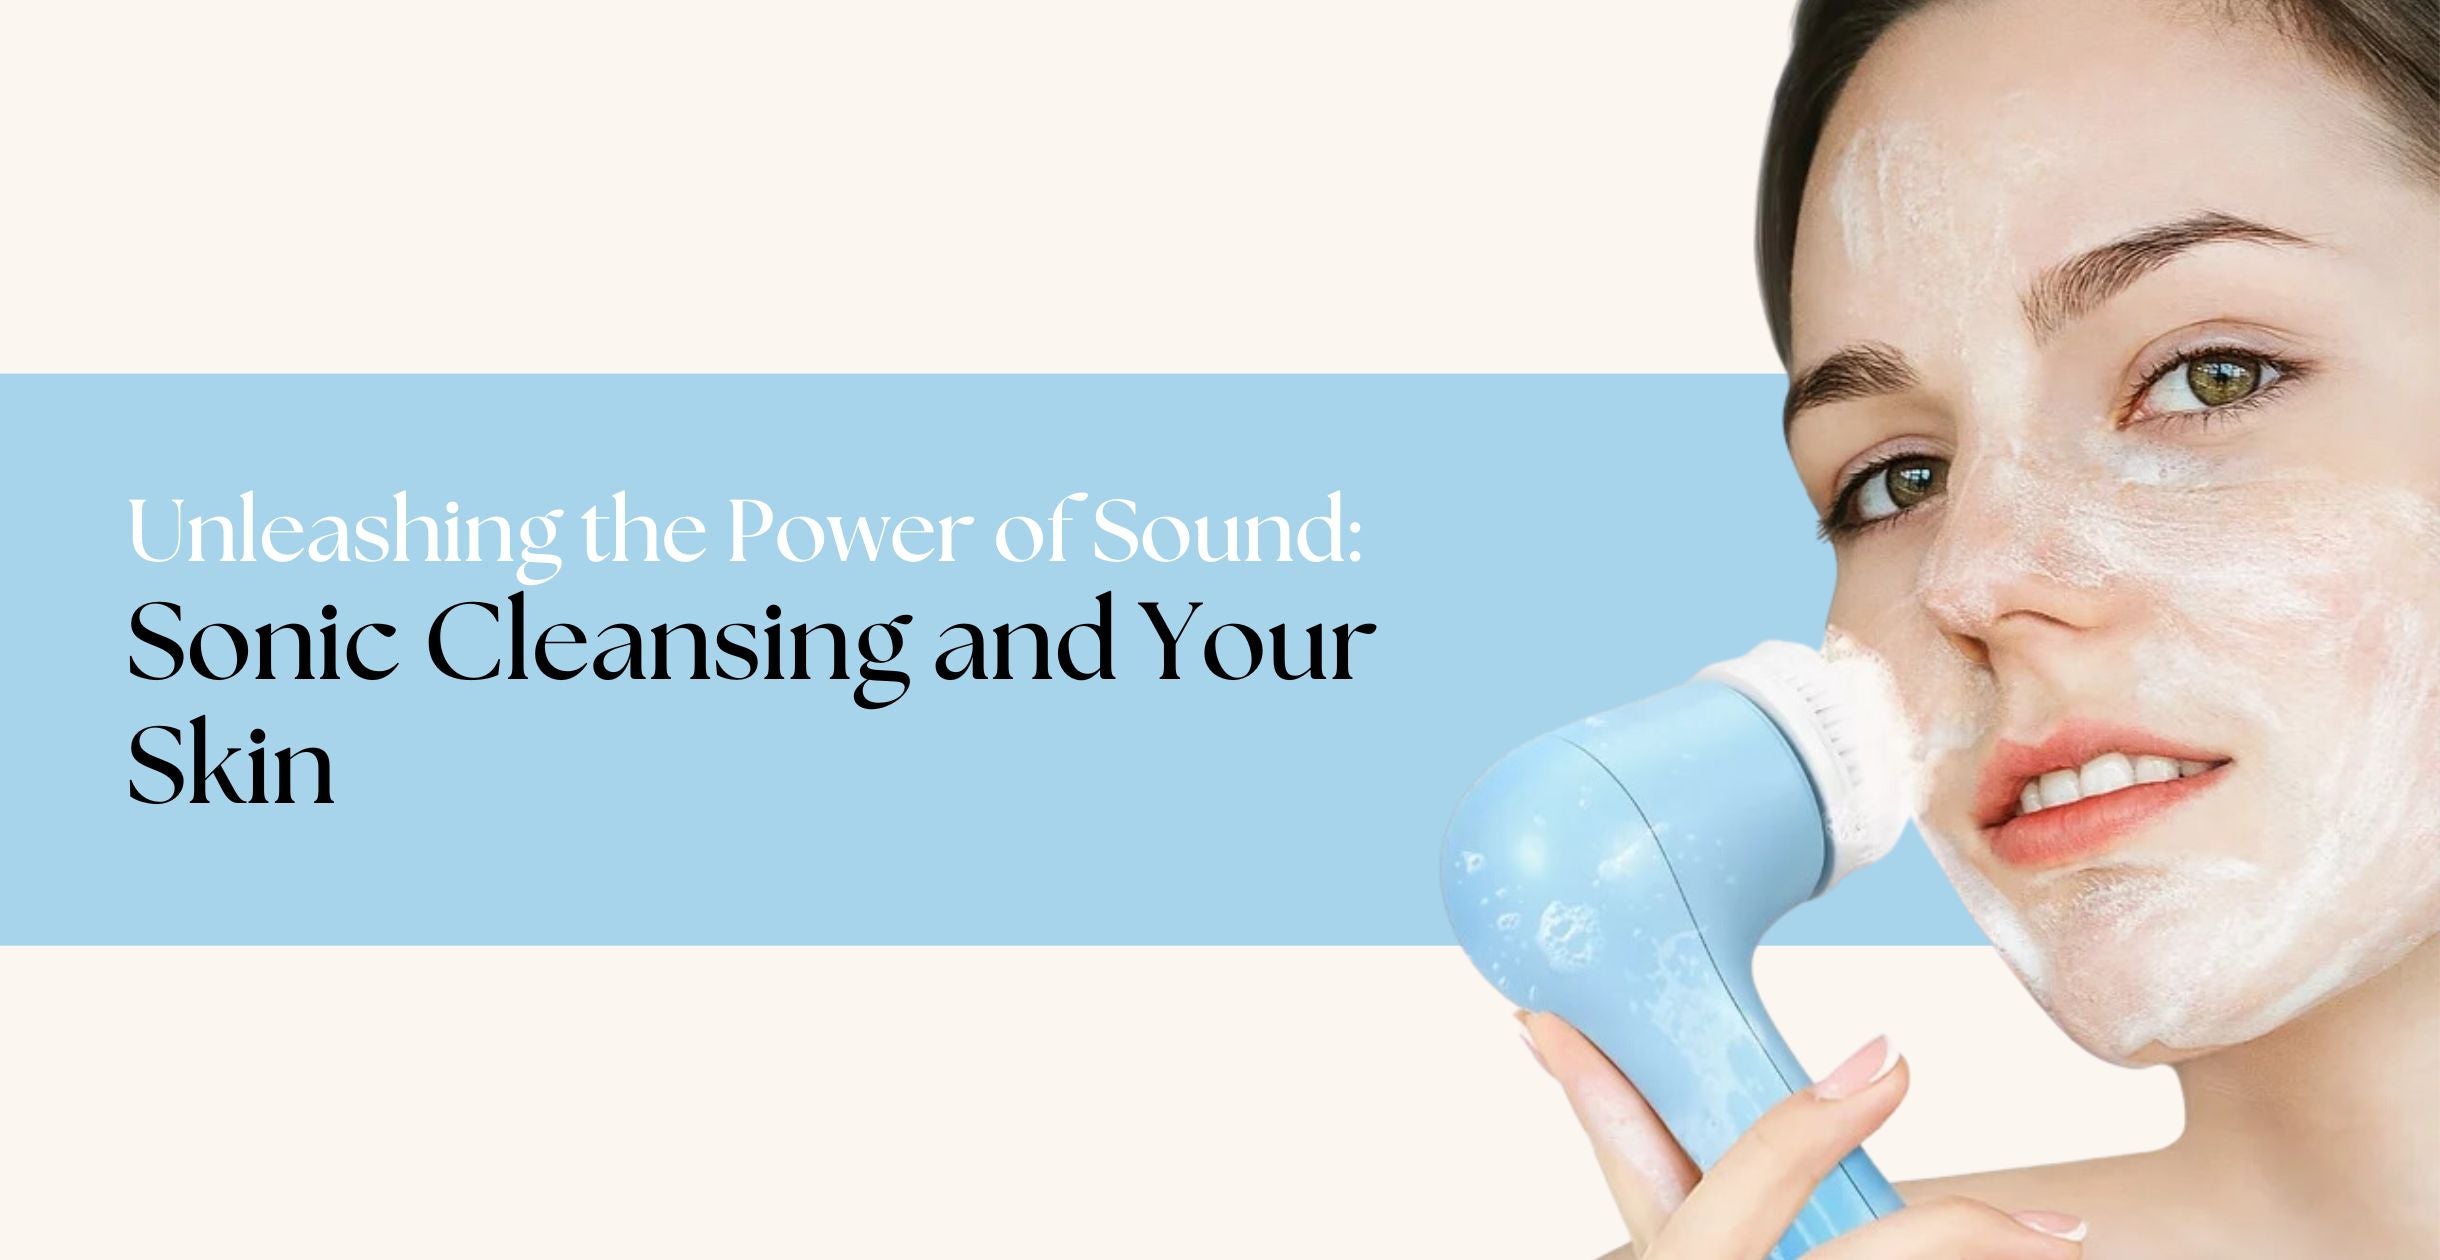 Unleashing the Power of Sound: Sonic Cleansing and Your Skin